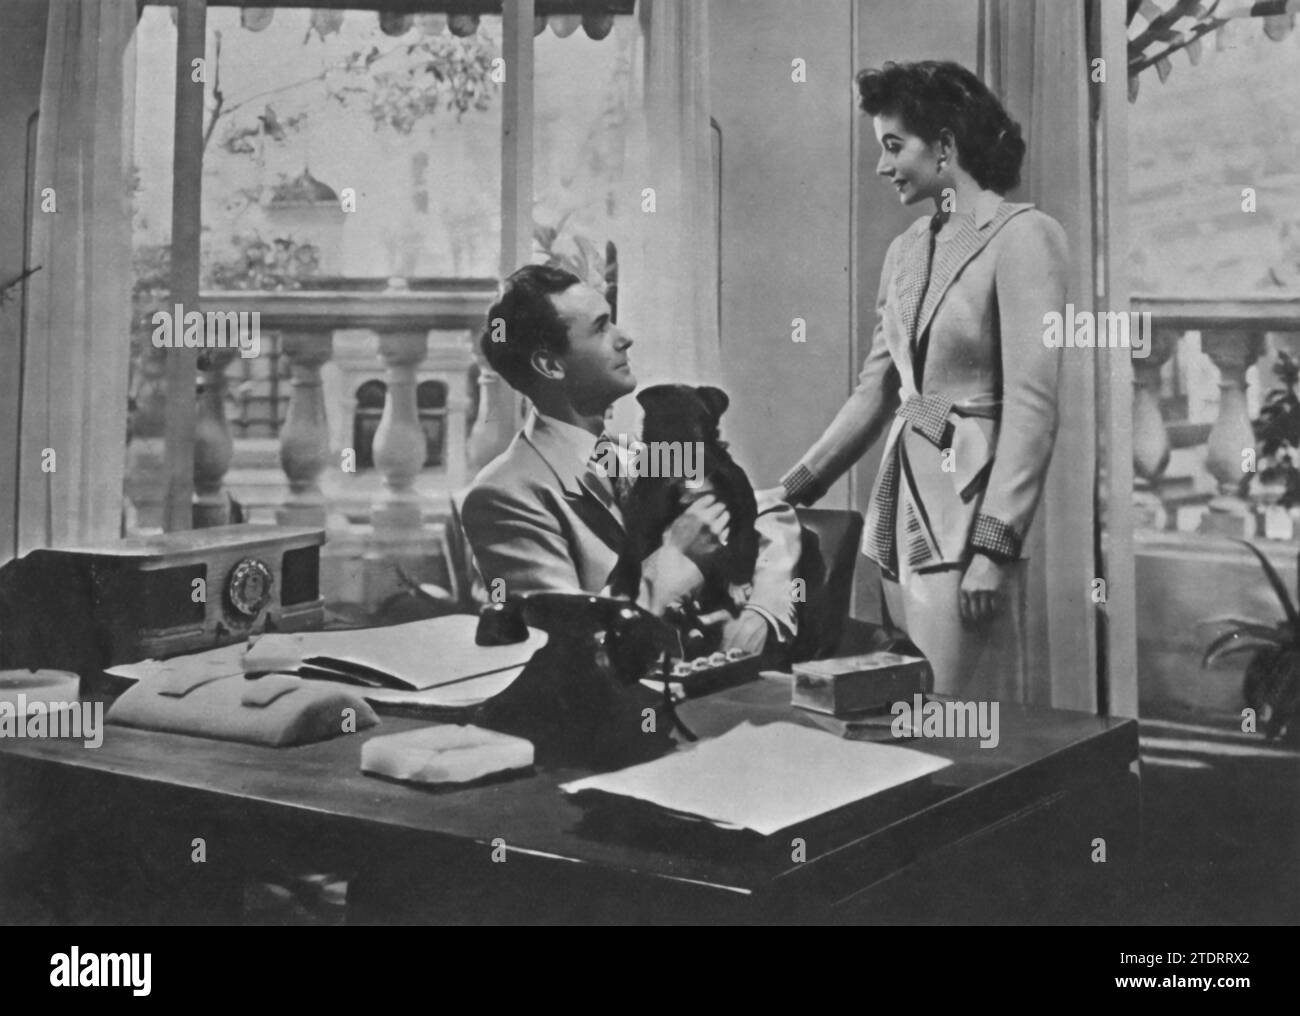 Margaret Lockwood and Griffith Jones star in 'Look Before You Love' (1948), also known as 'An Ideal Husband' in the United States. In this British drama, Lockwood plays a Brazilian woman who marries an Englishman, portrayed by Jones. Their story unfolds with a blend of romance and intrigue, showcasing Lockwood's versatility as an actress and the charming on-screen dynamic between the two stars. Stock Photo